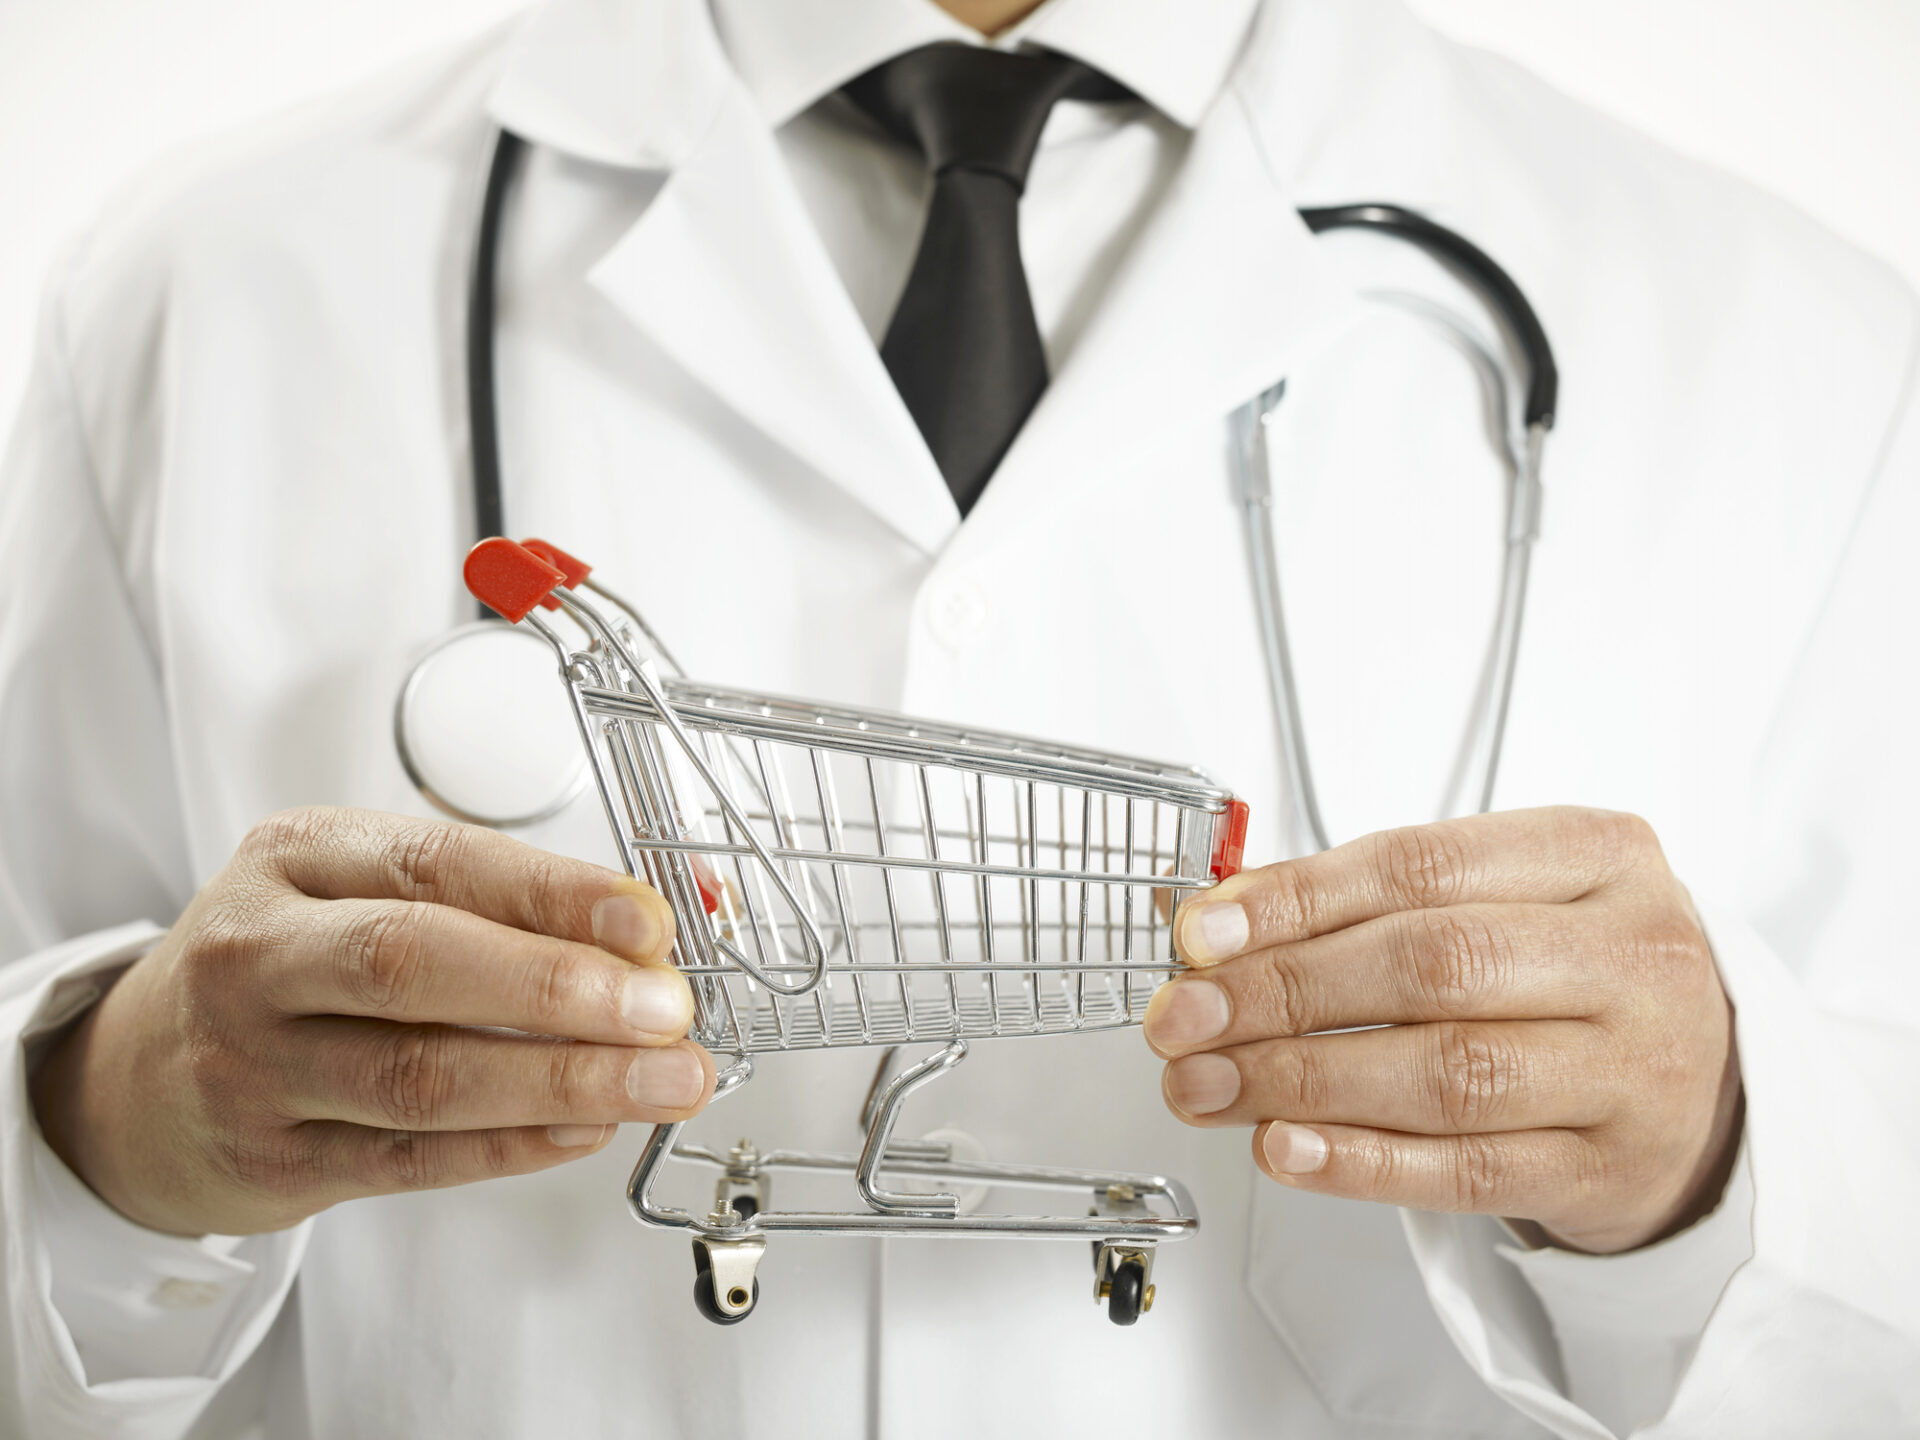 New Research: Consumers Share Opinions on Healthcare Price and Propensity to Shop